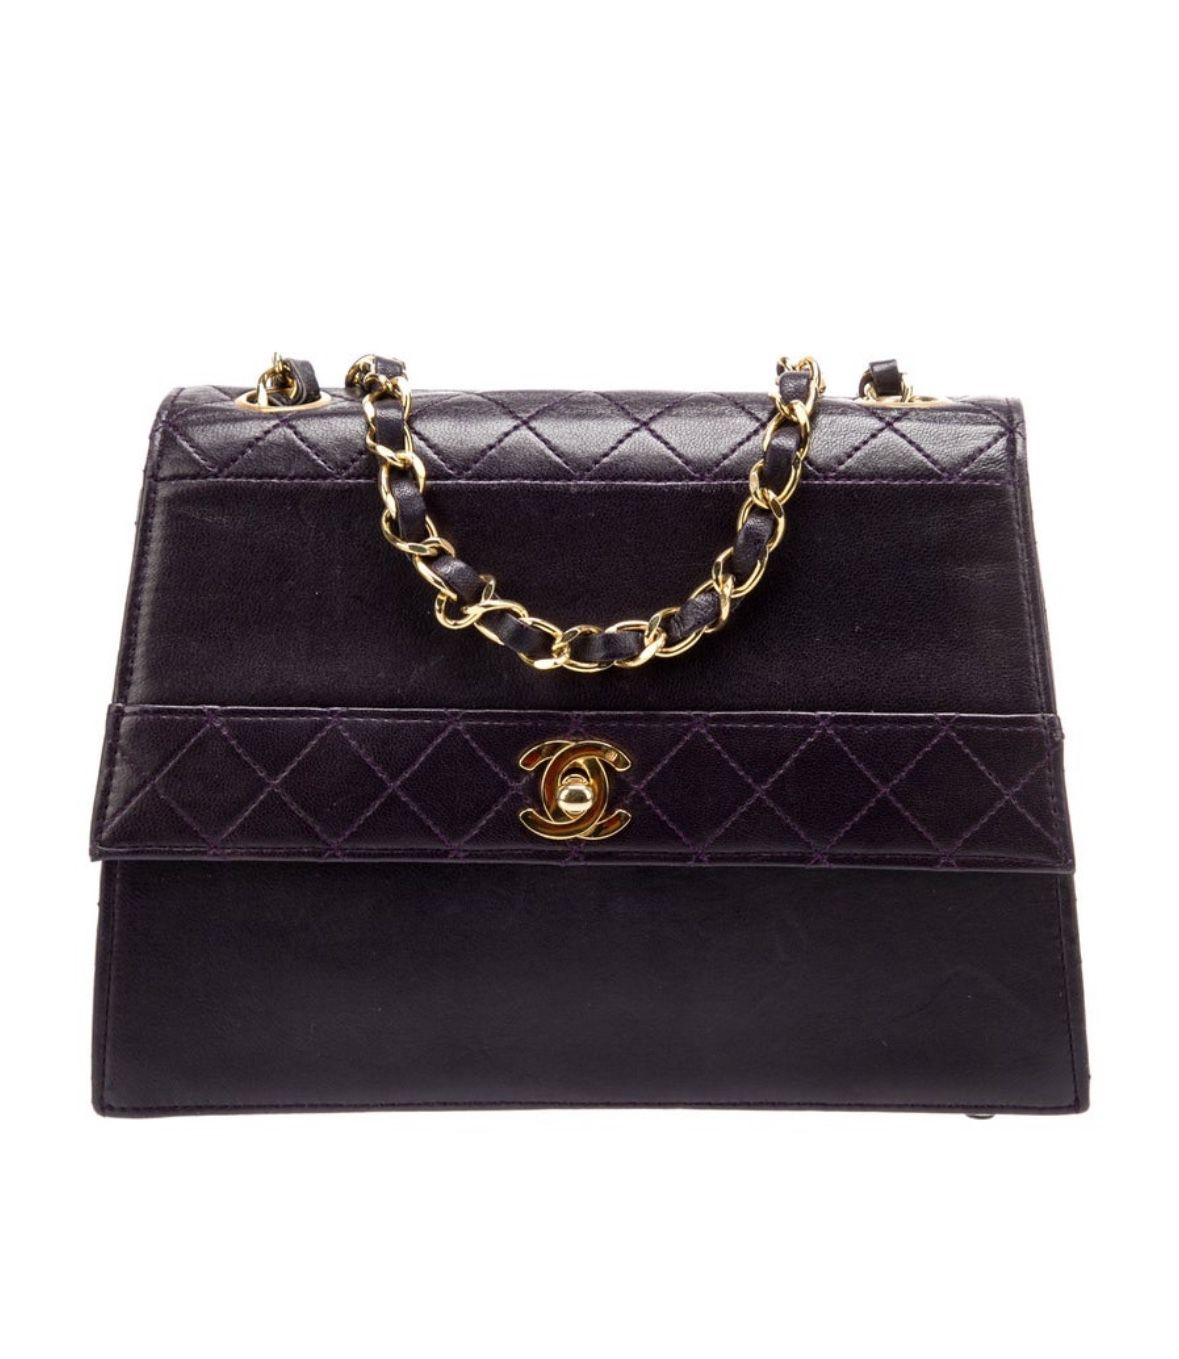 Authentic Chanel Trapezoid Flap bag 